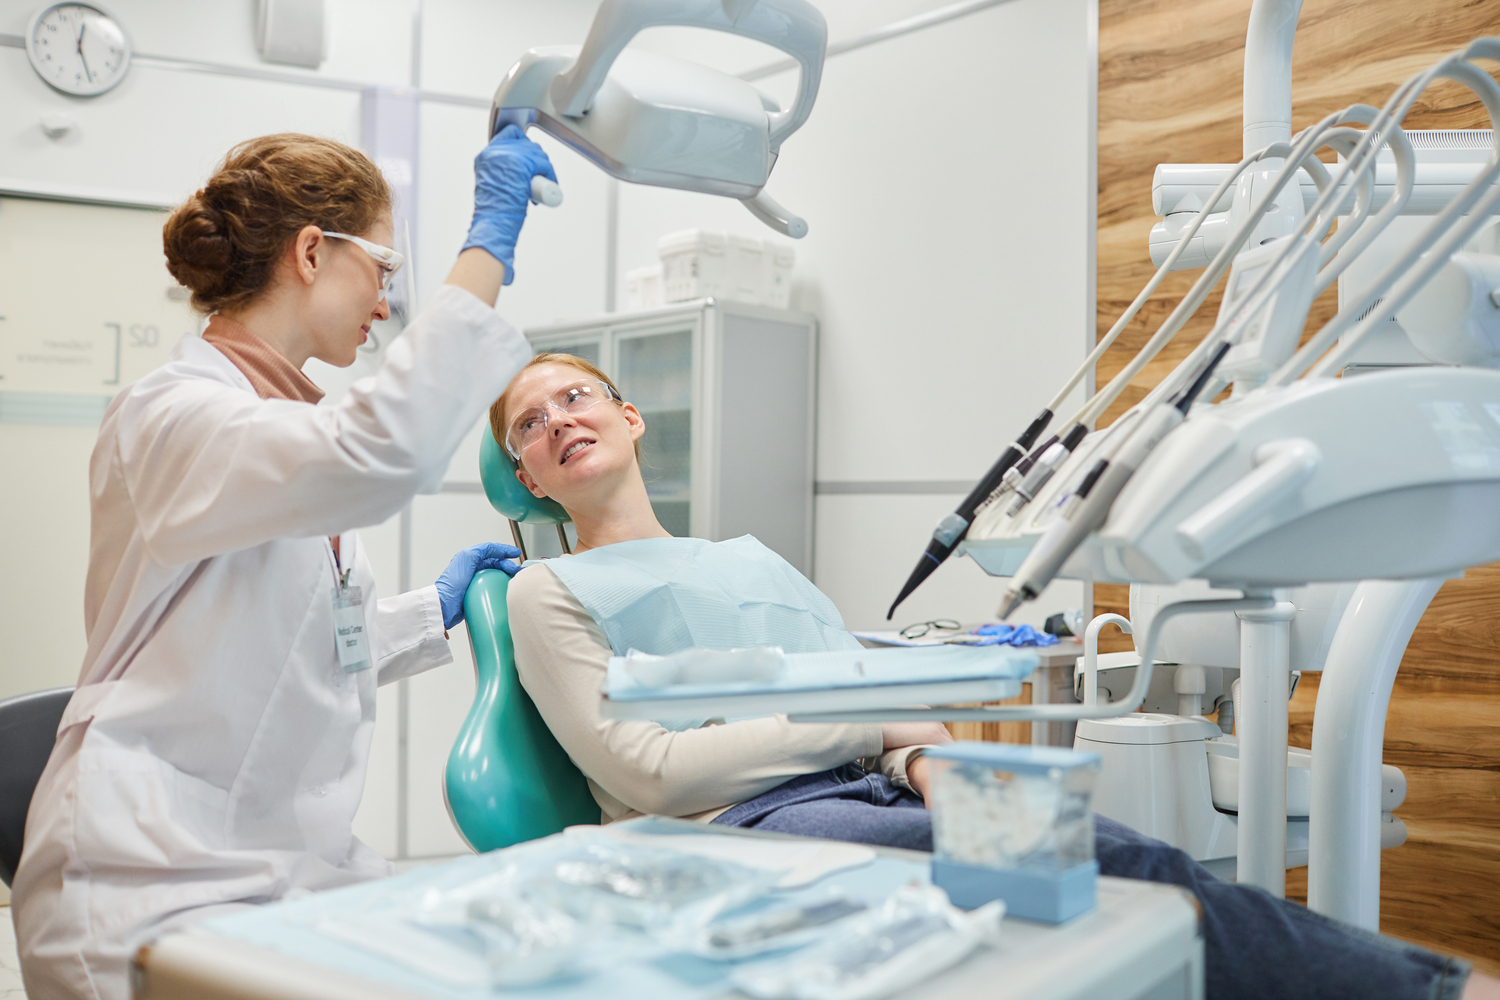 Patient lying on dental chair and talking to dentist during medical exam at clinic